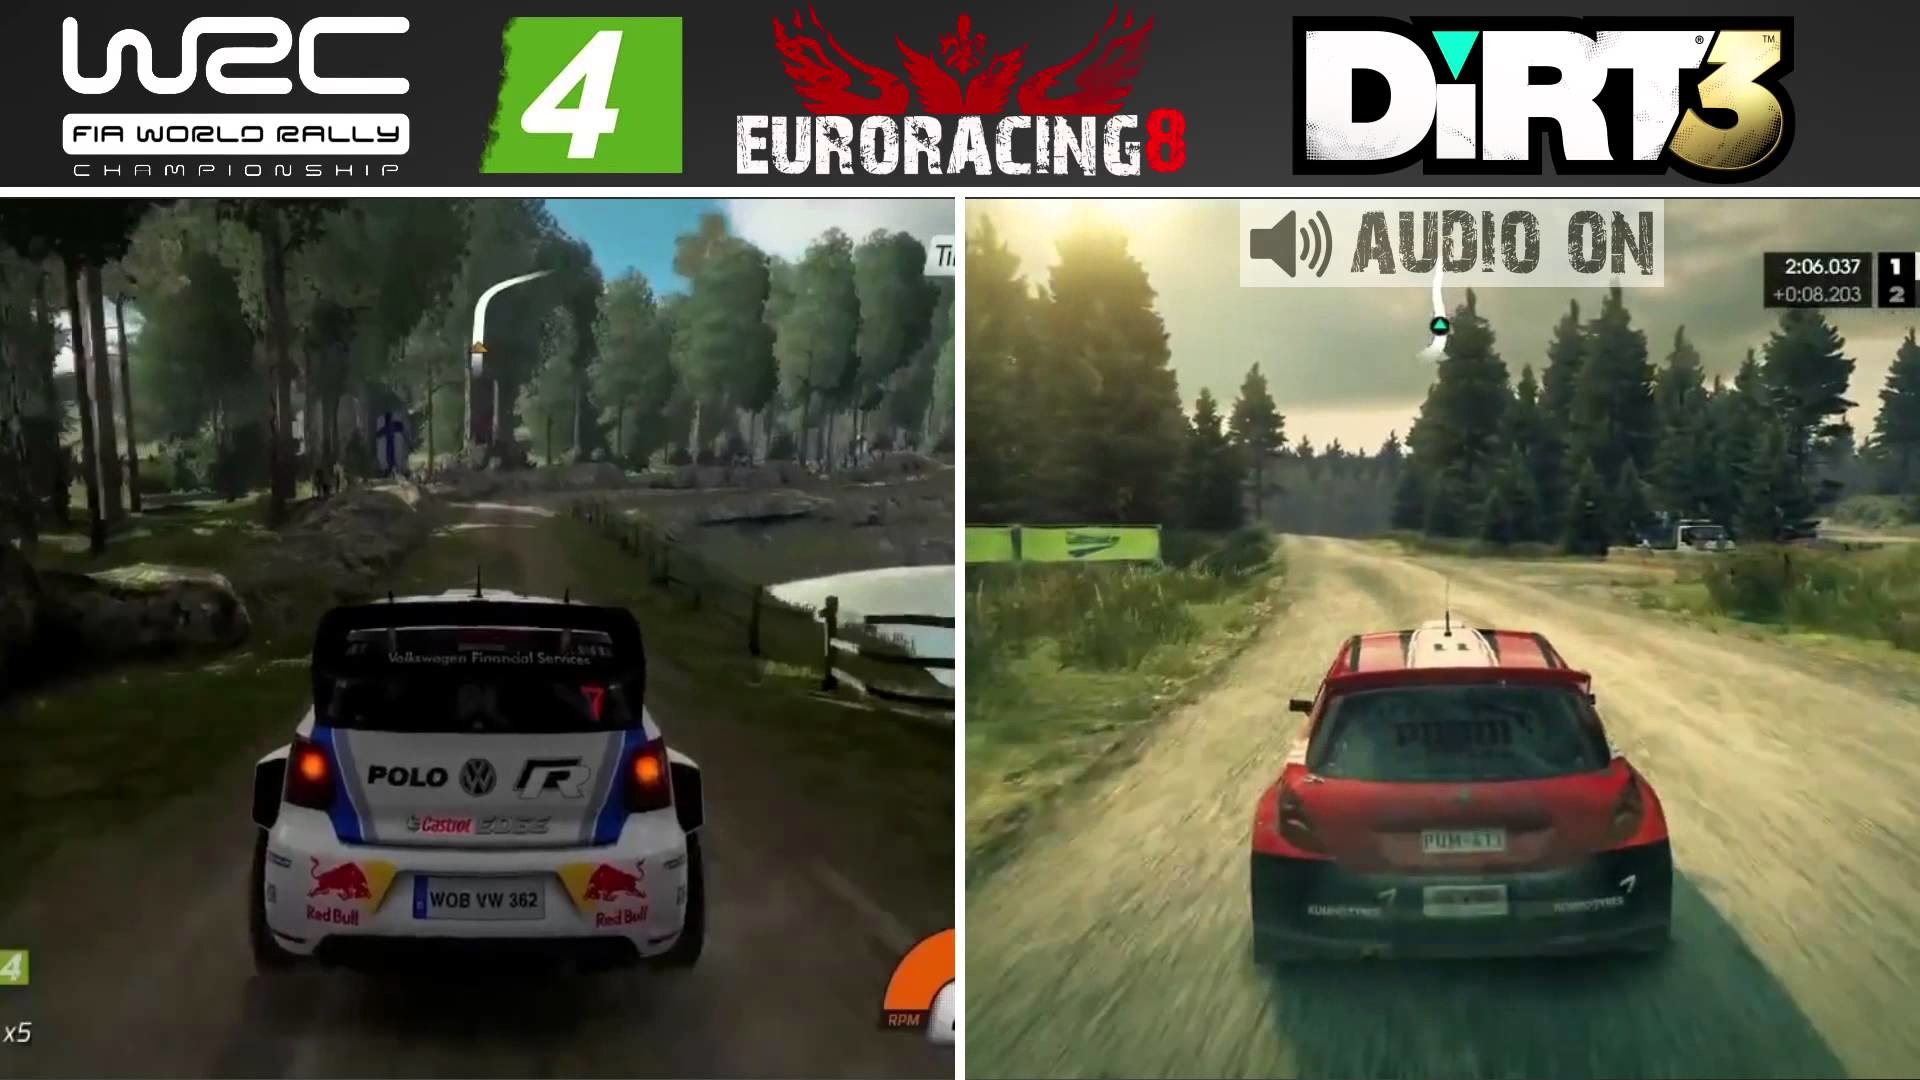 1920x1080 WRC 4 Vs DiRT 3 | Finland Rally Stage | Graphics & Sound Comparison  [HD][PC] - YouTube